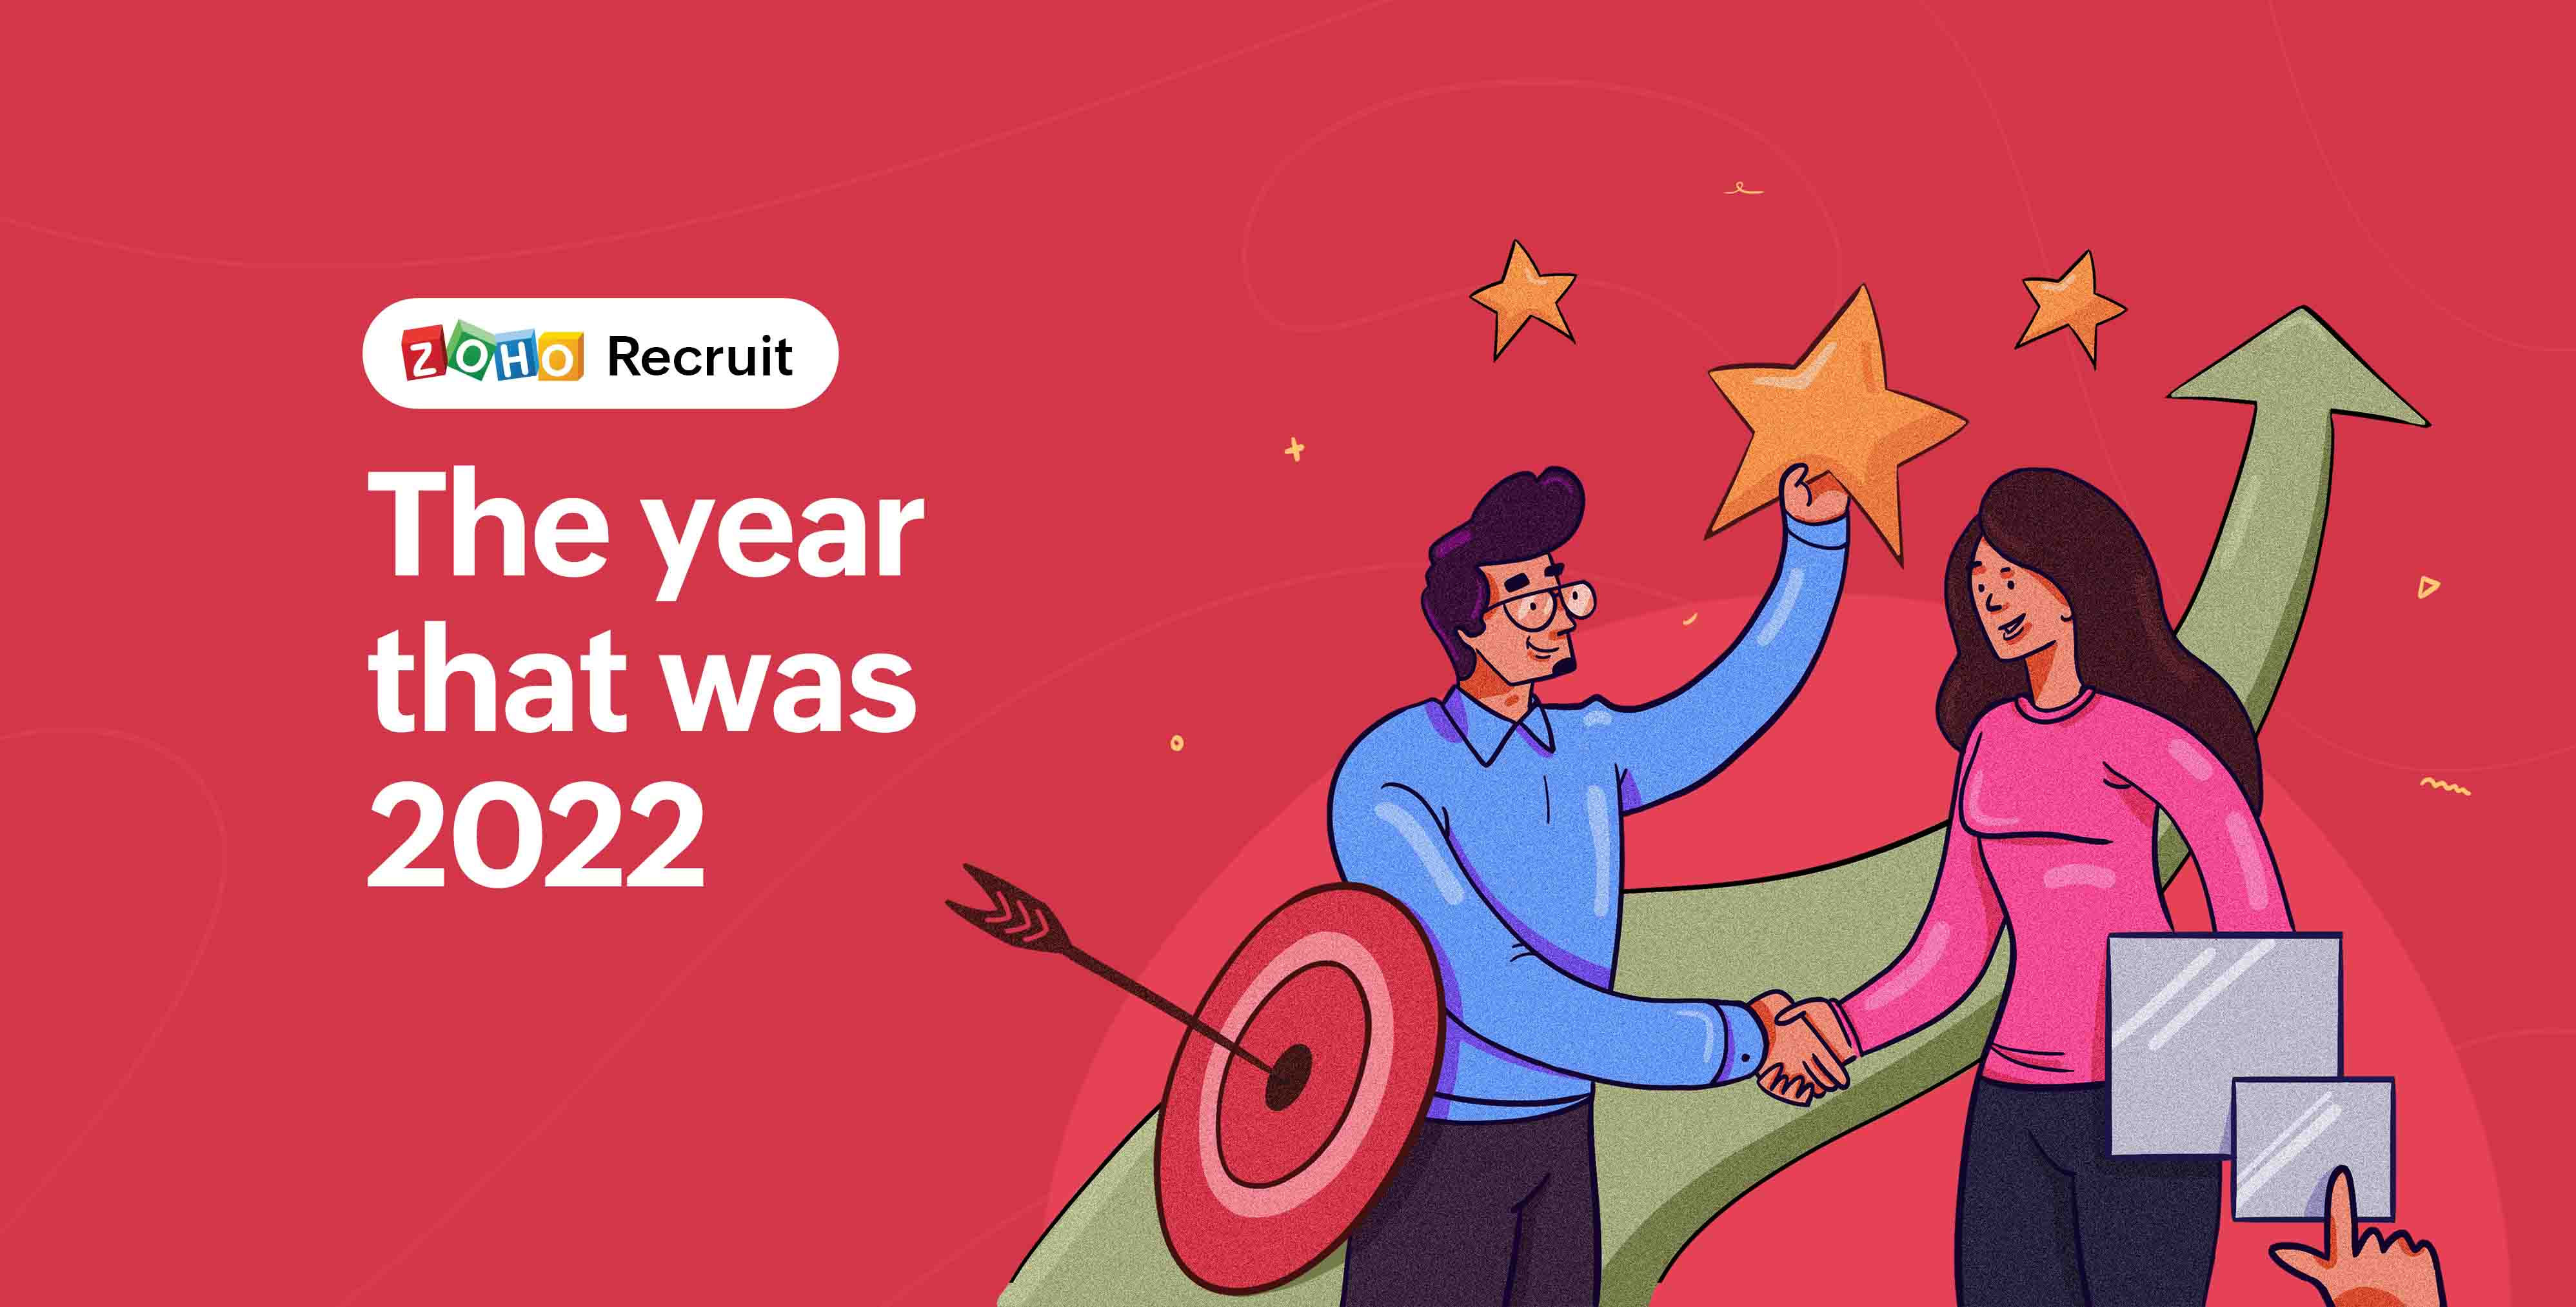 Zoho Recruit in 2022 - Year in Review